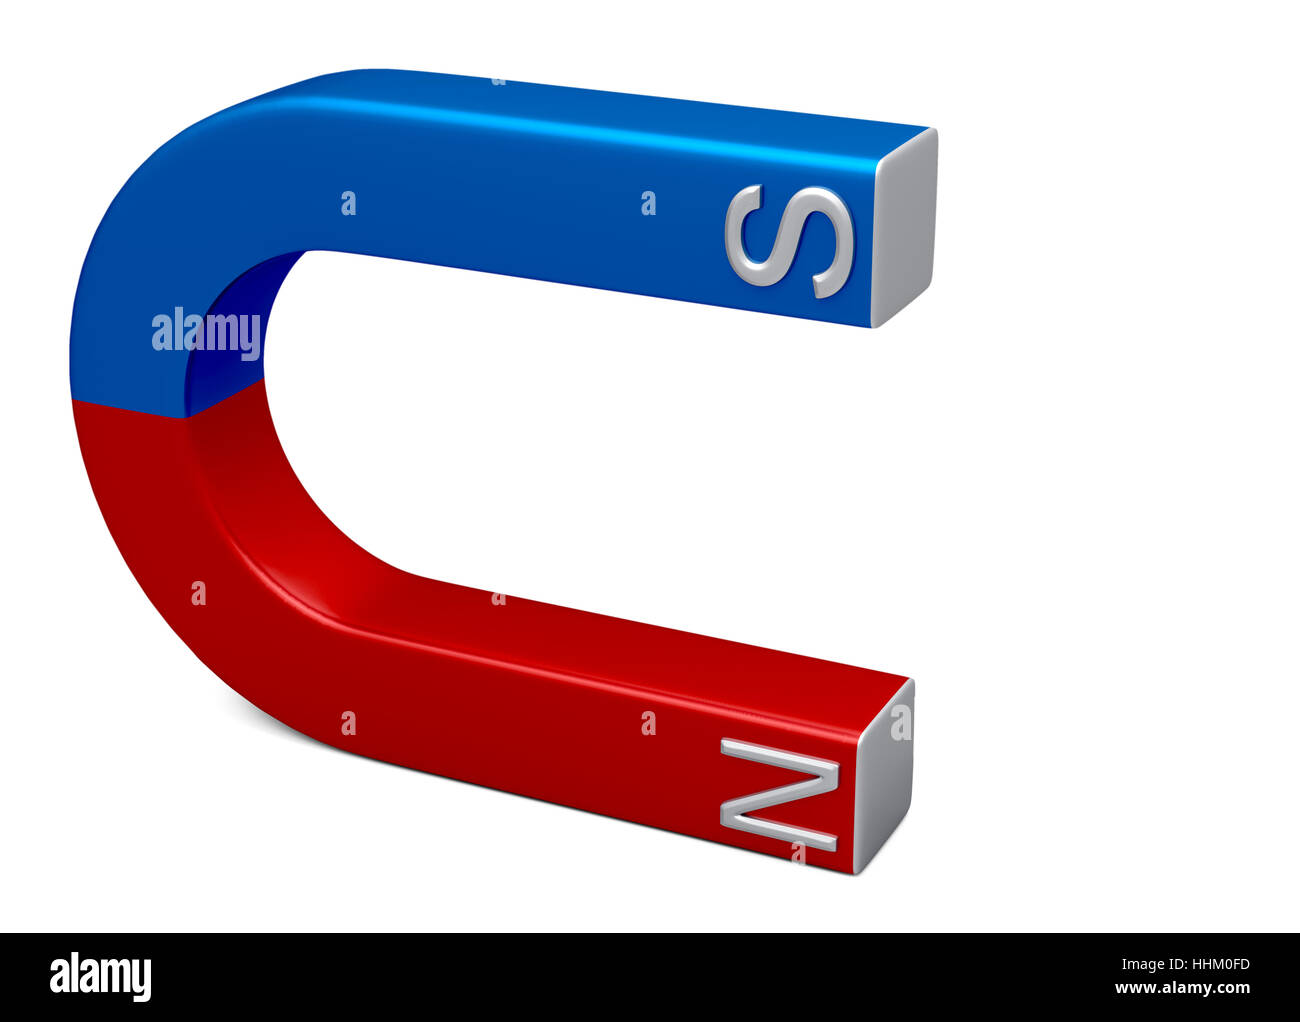 blue, field, horseshoe, magnetic, magnet, polarity, red, blue, object, single, Stock Photo